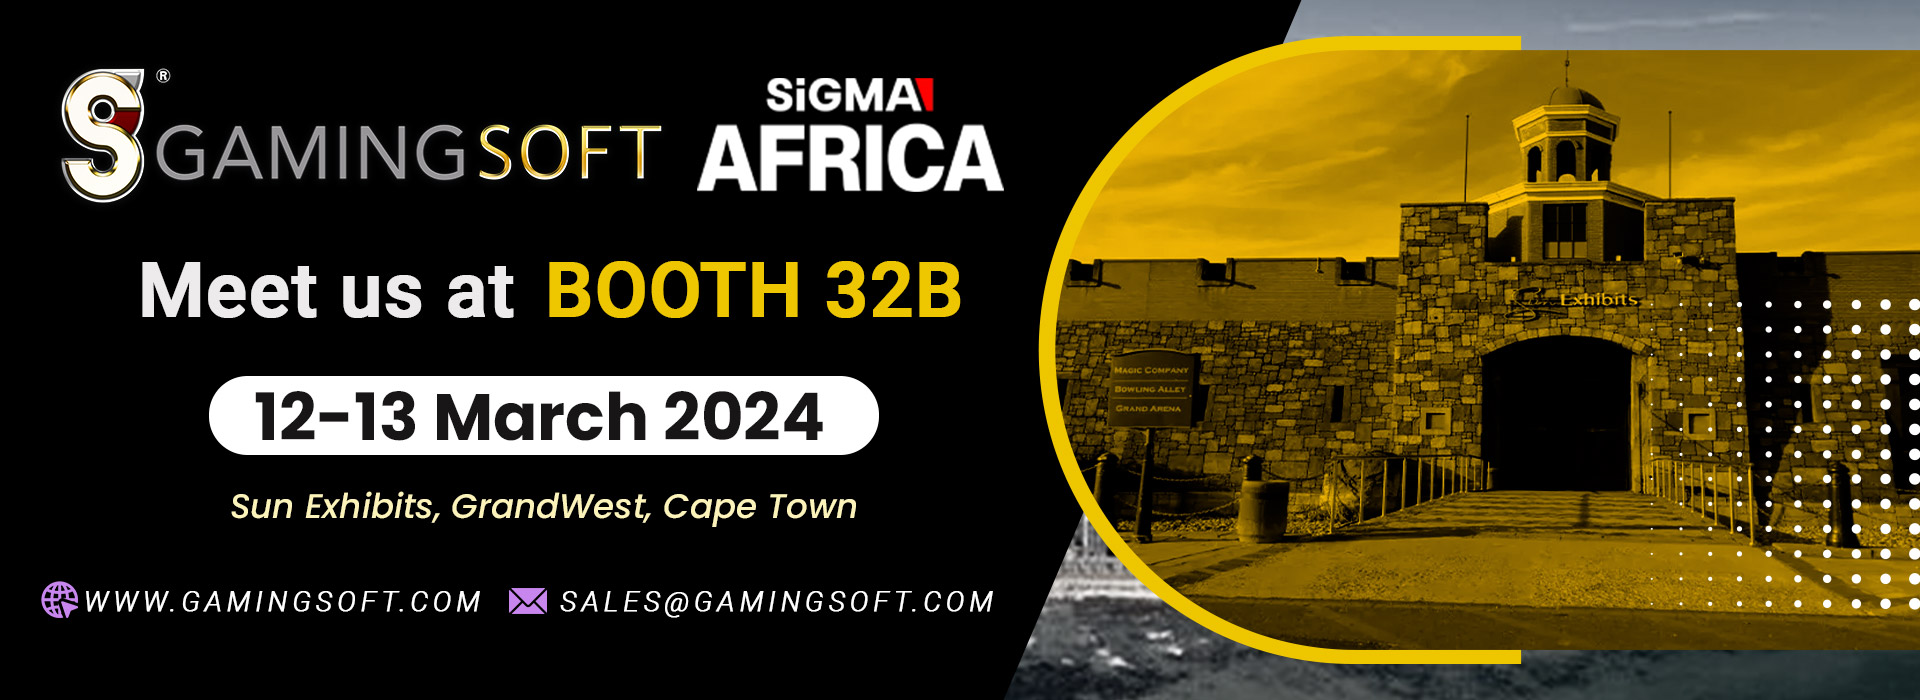 Sigma Africa Meet us at Booth 32B Web Banner - GamingSoft